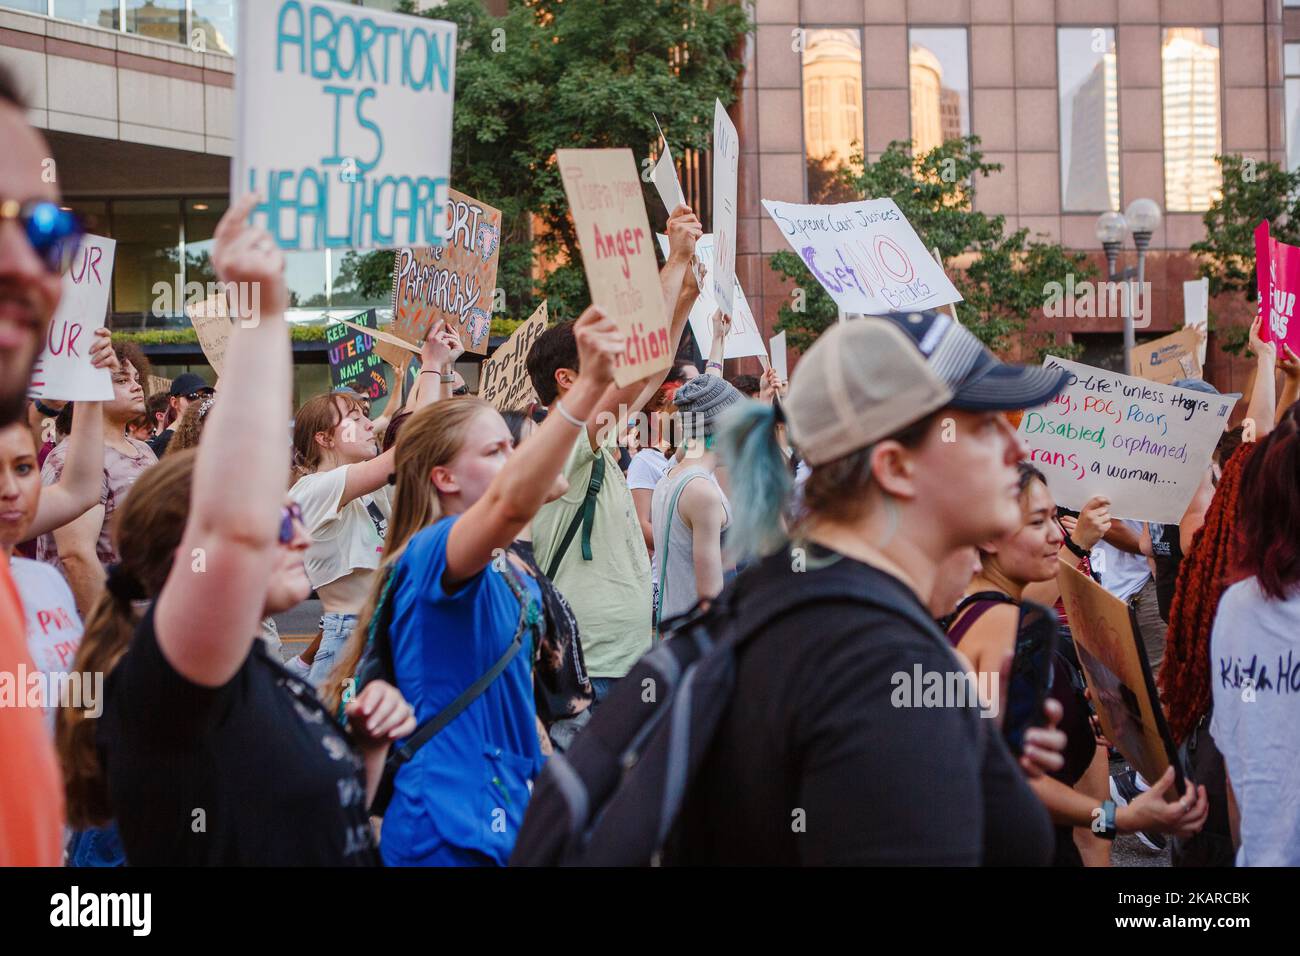 A crowd marches for abortion rights holding protest signs Stock Photo